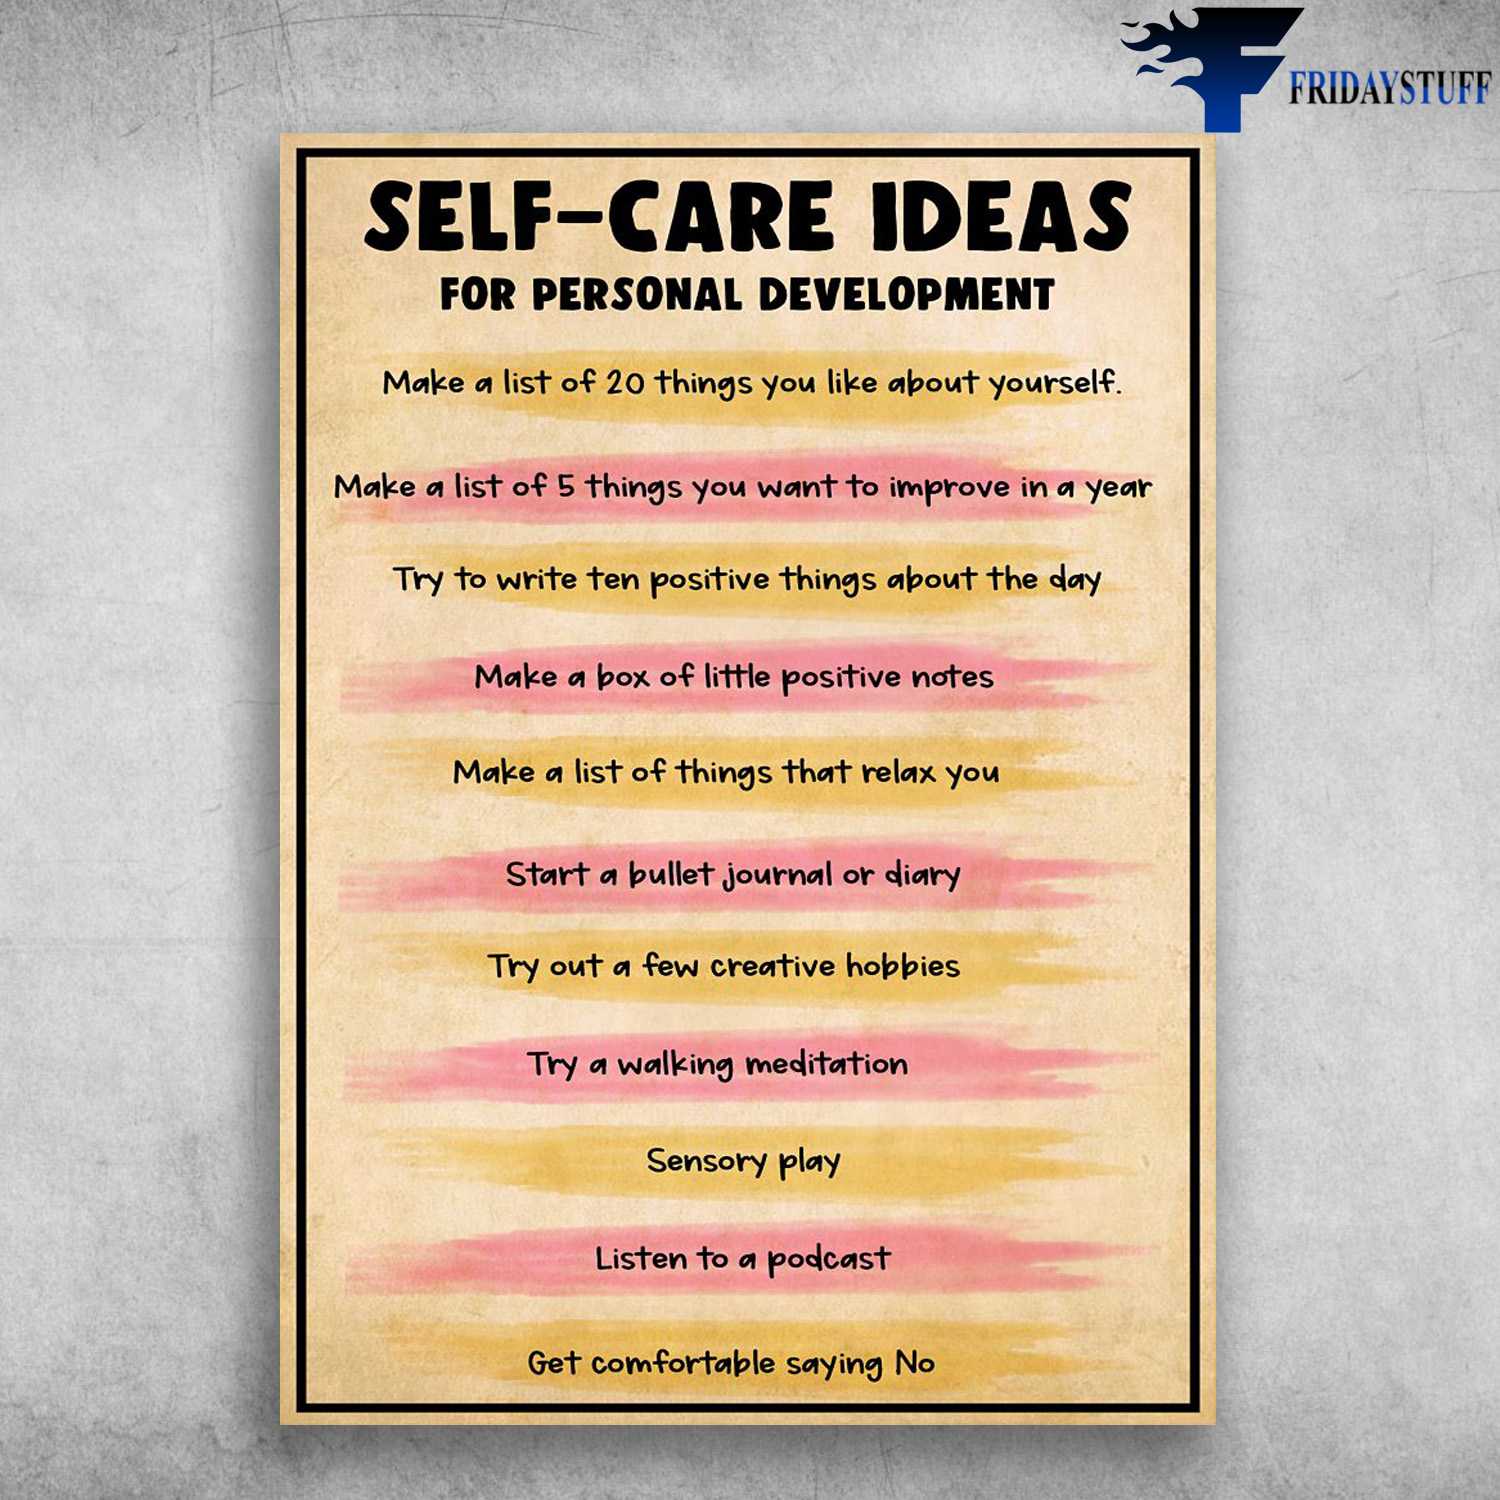 20 Personal development ideas for self-growth.